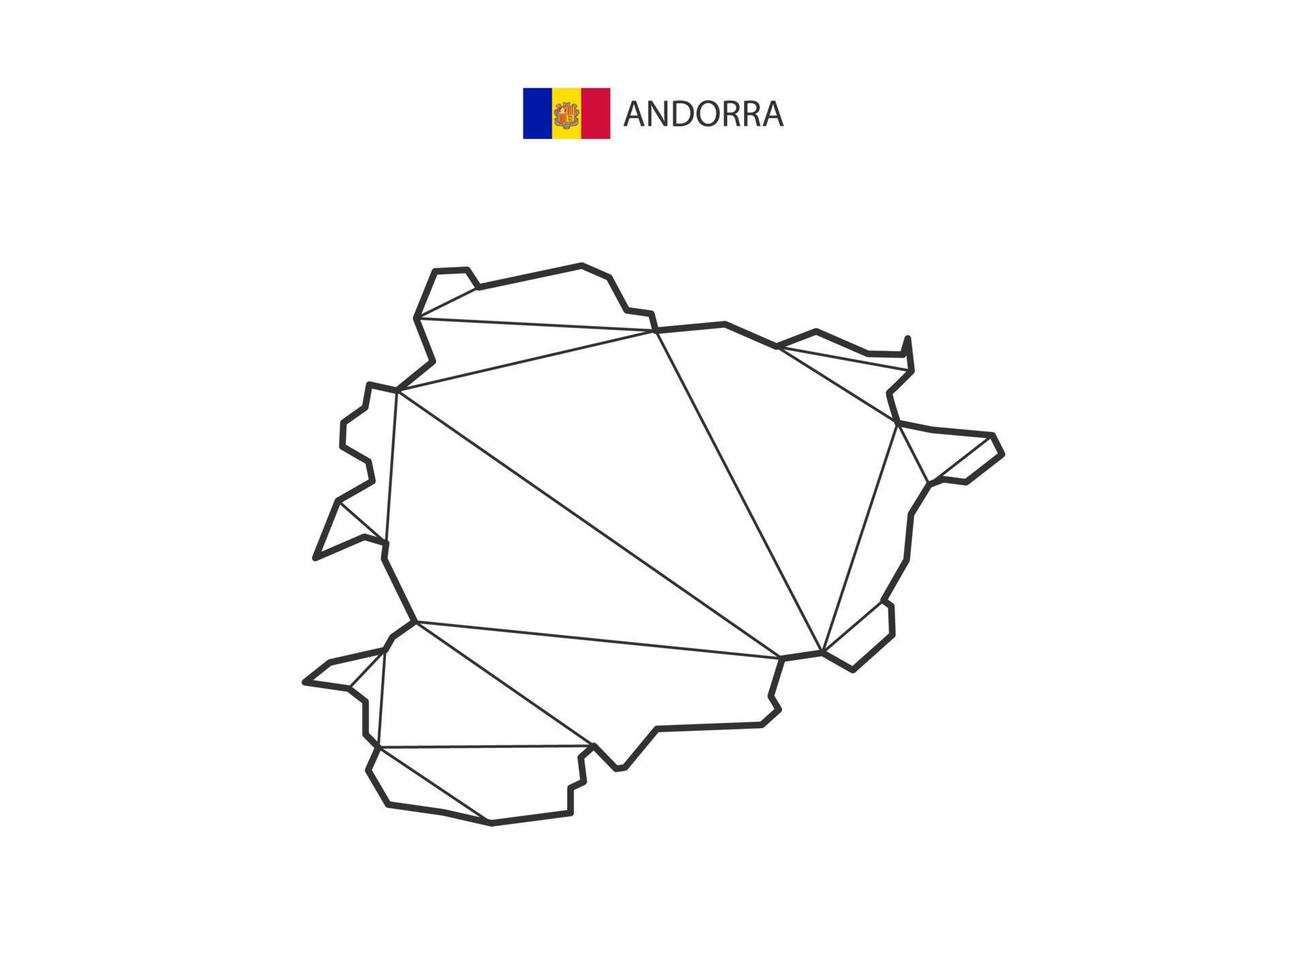 Mosaic triangles map style of Andorra isolated on a white background. Abstract design for vector. vector